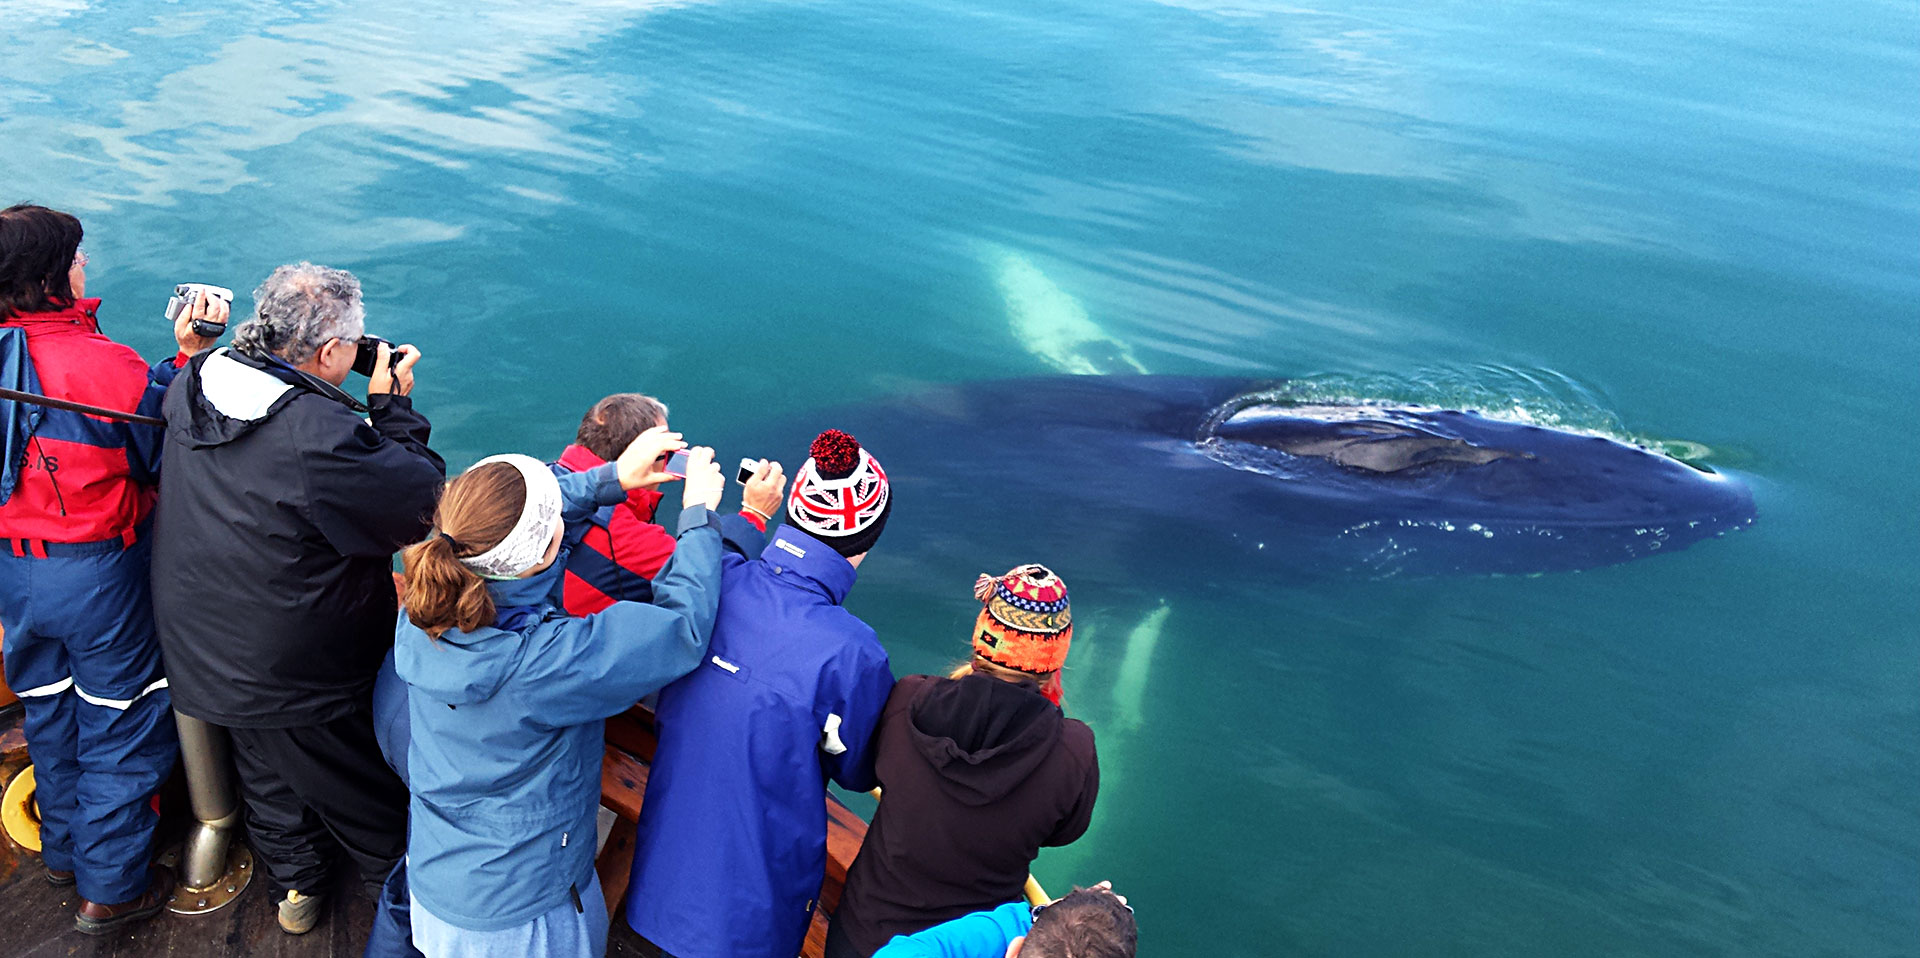 The perfect whale watching tour